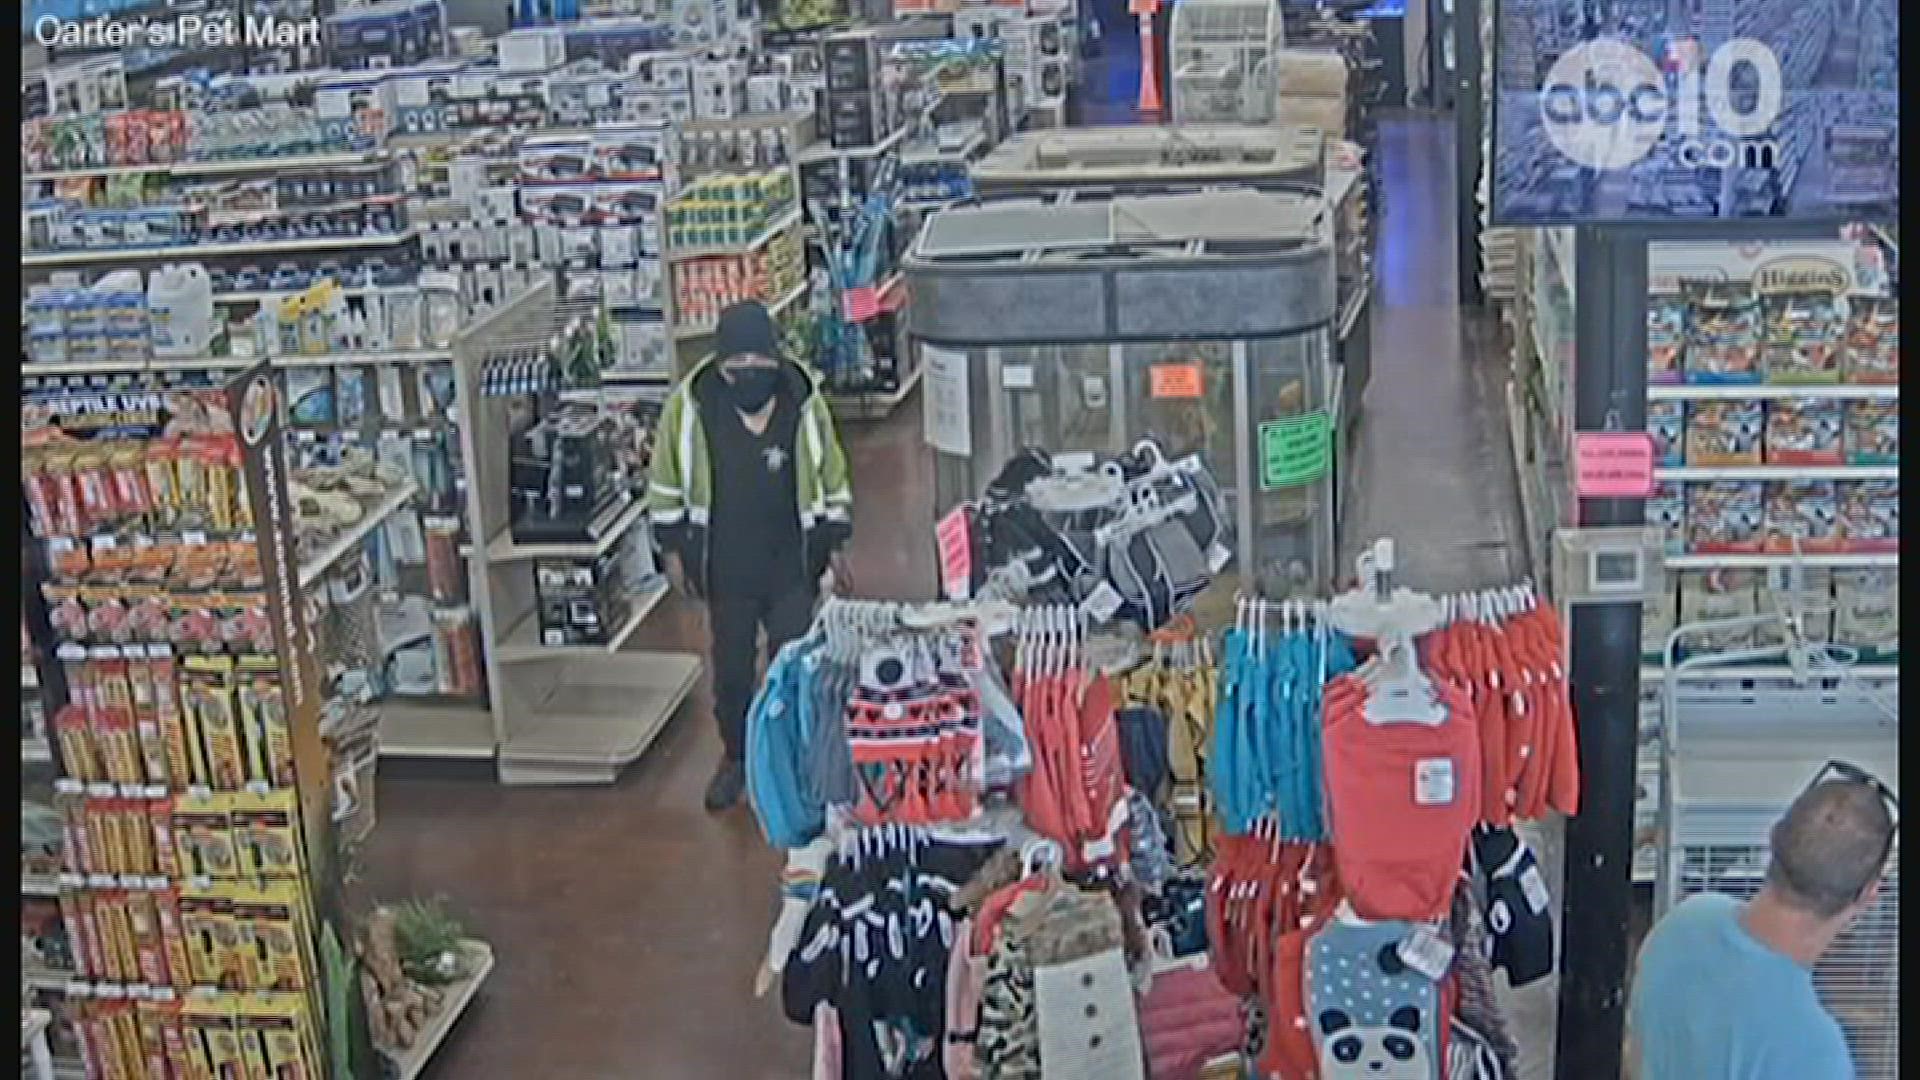 Security camera video shows the moments a man runs out of Carter's Pet Mart in Stockton stealing a Blue-Fronted Amazon Parrot, worth $5,000.